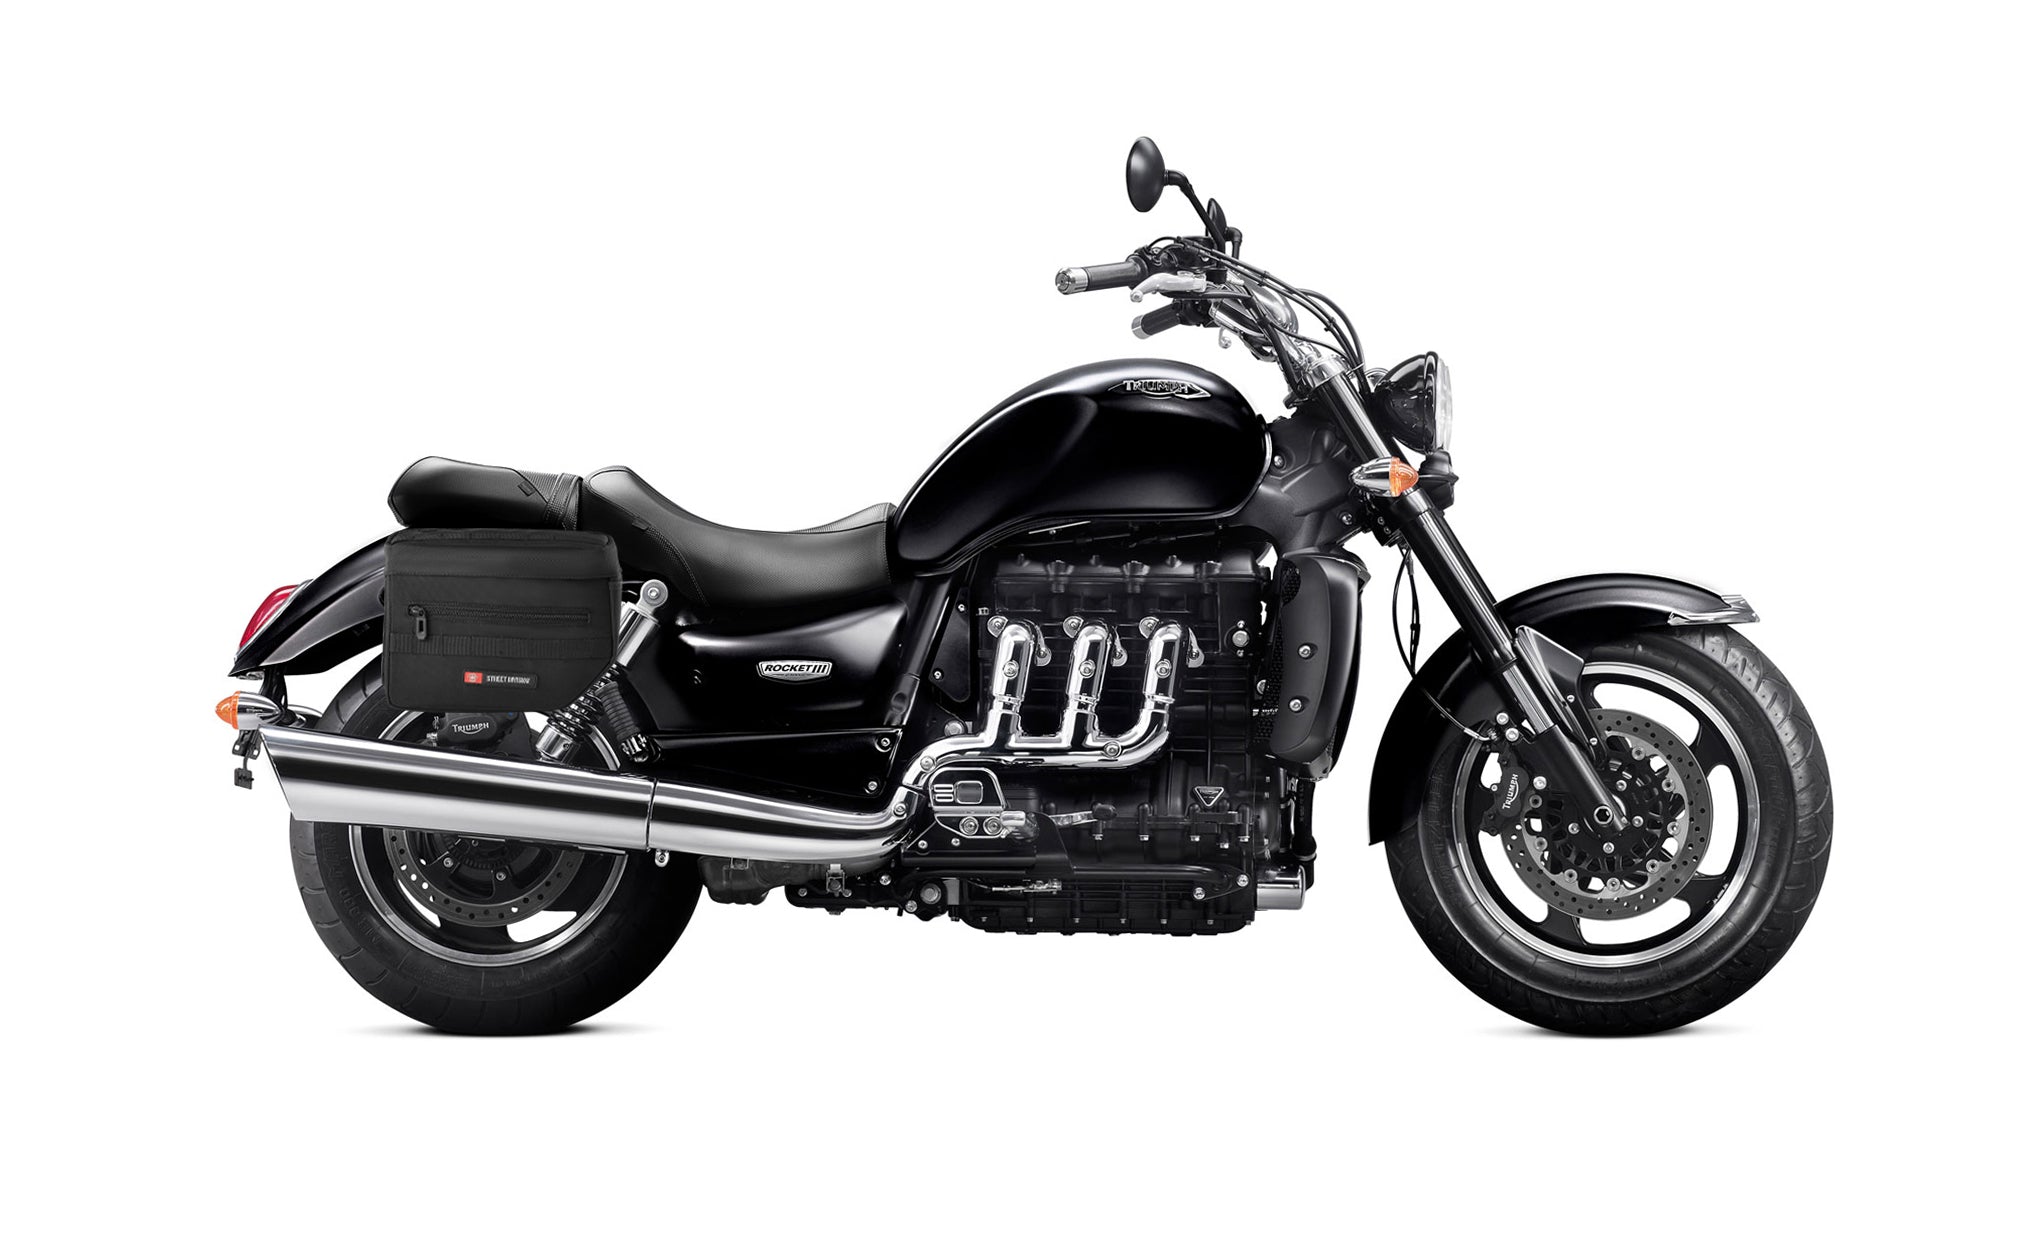 Viking Patriot Small Triumph Rocket Iii Classic Motorcycle Throw Over Saddlebags on Bike Photo @expand